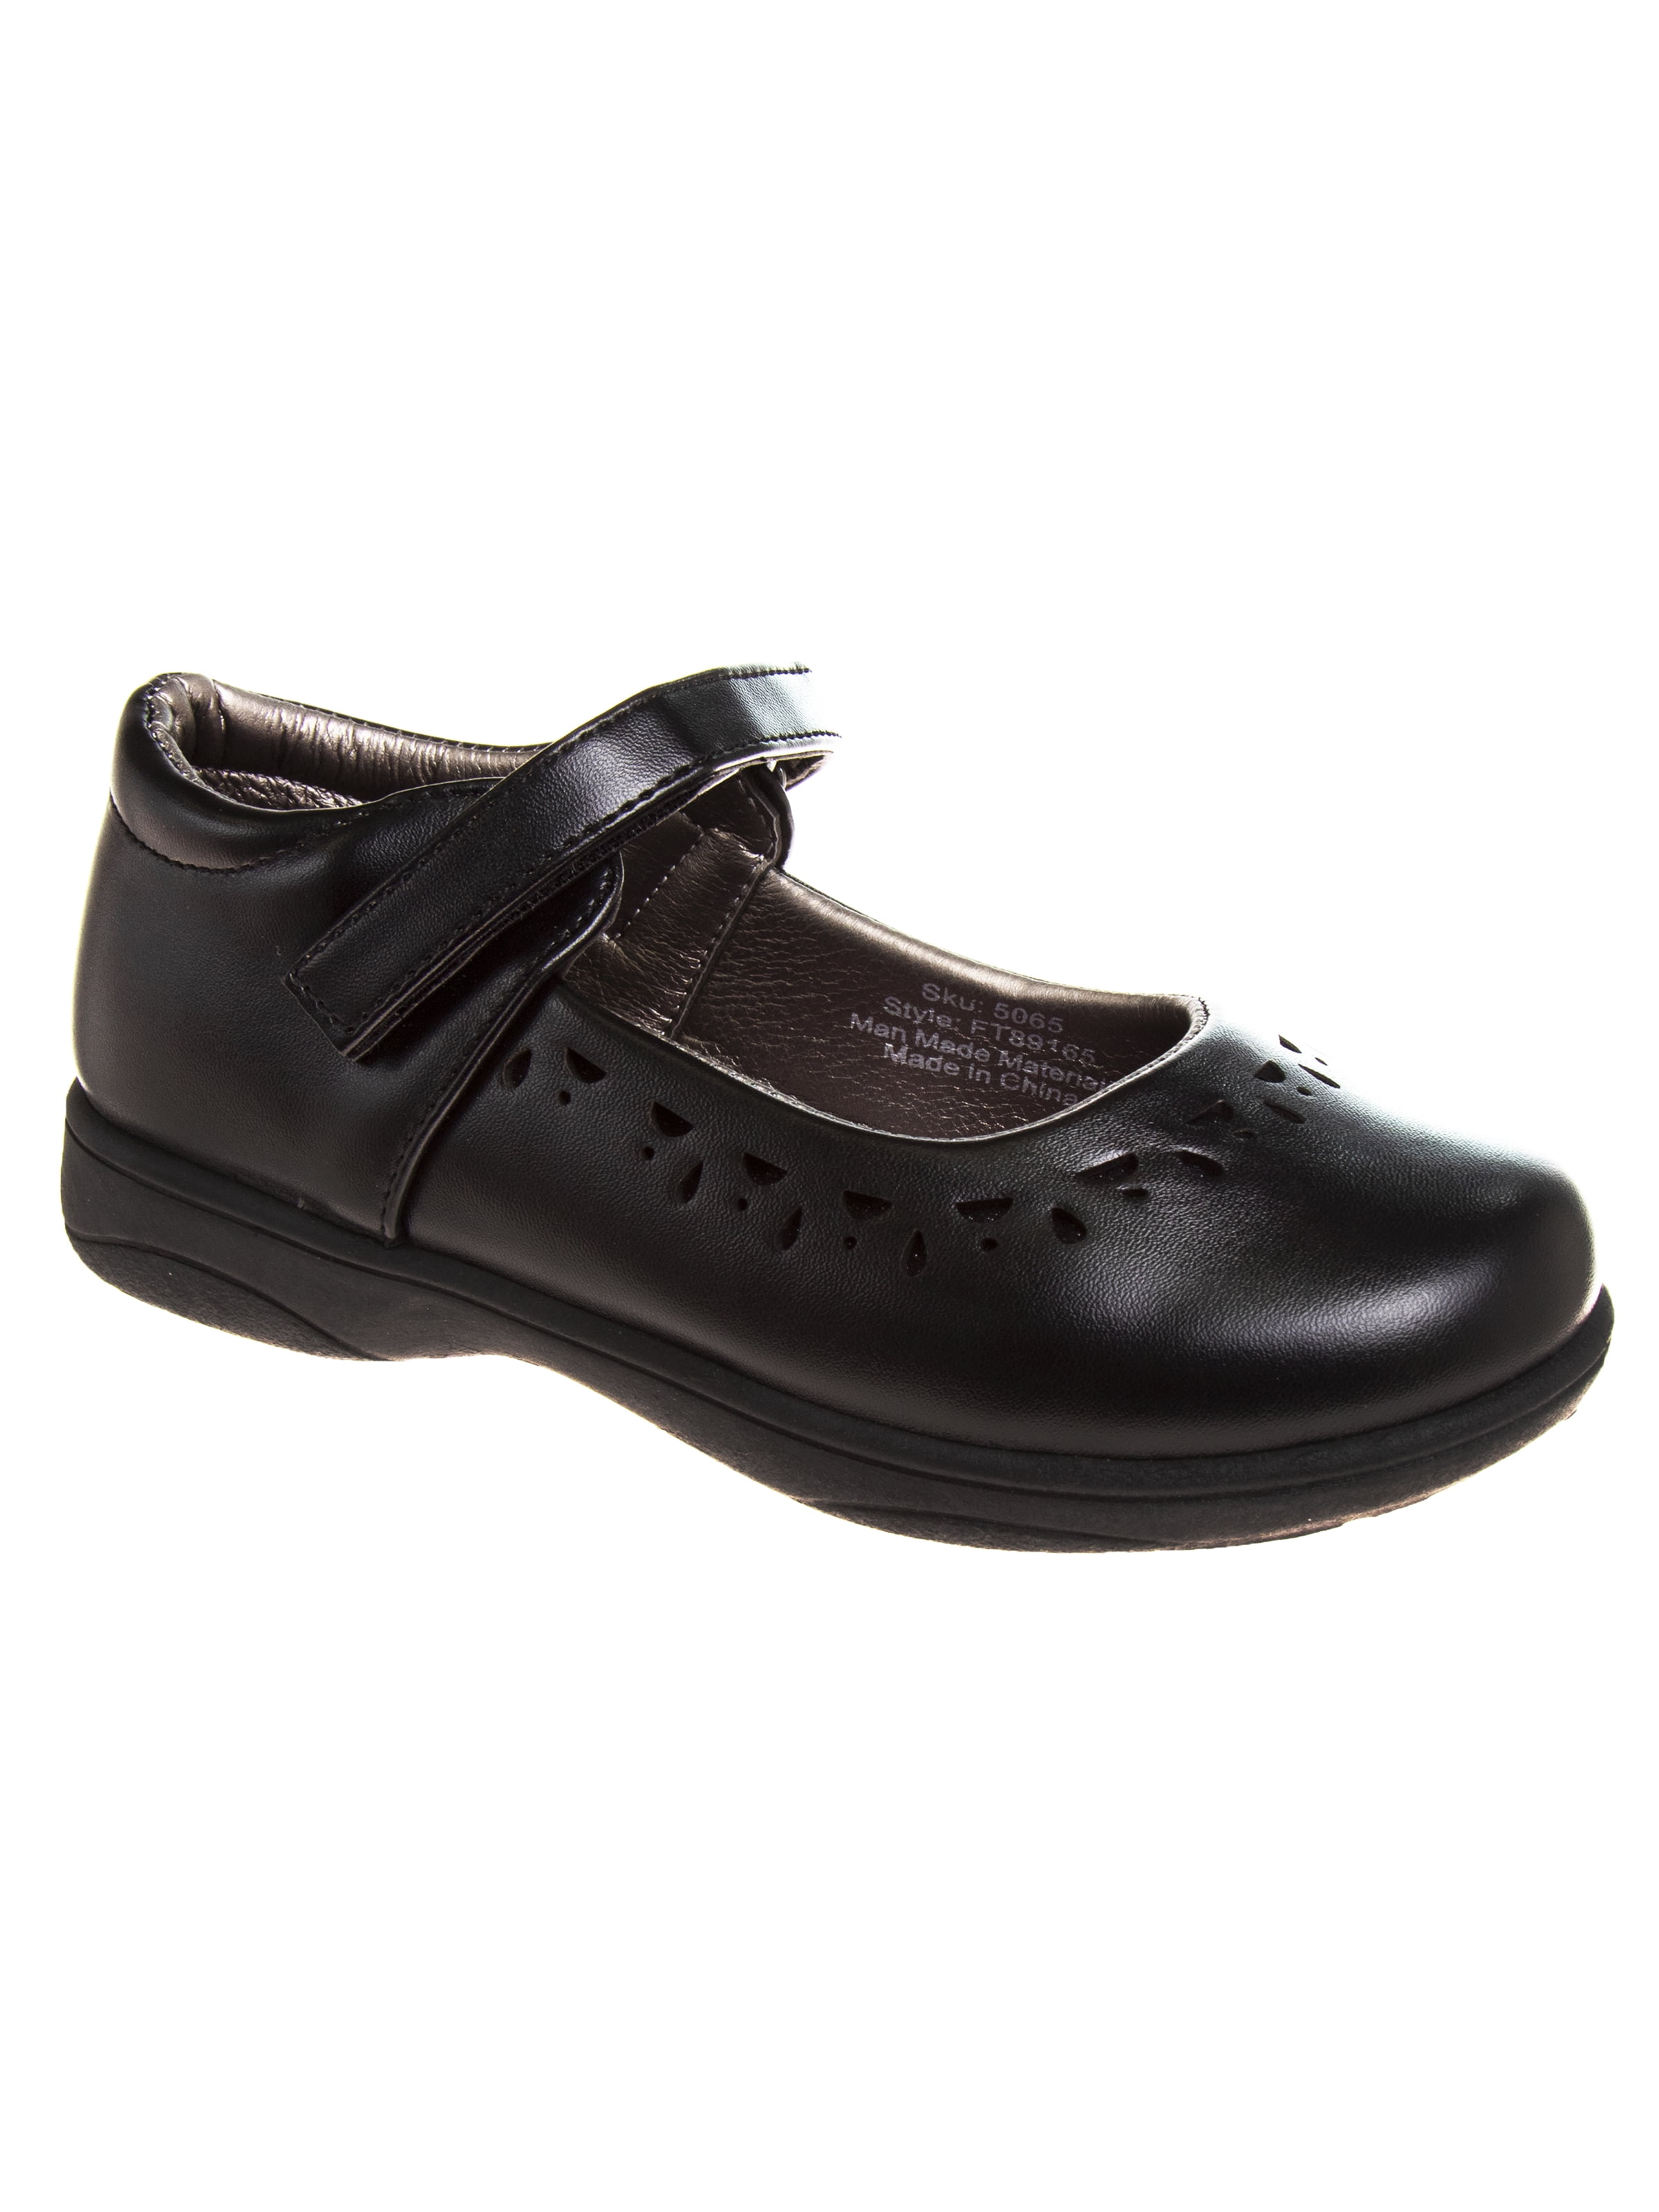 NEW GIRLS CHILDREN SCHOOL BLACK LEATHER CASUAL FORMAL STRAP FASTENING SHOES SIZE 